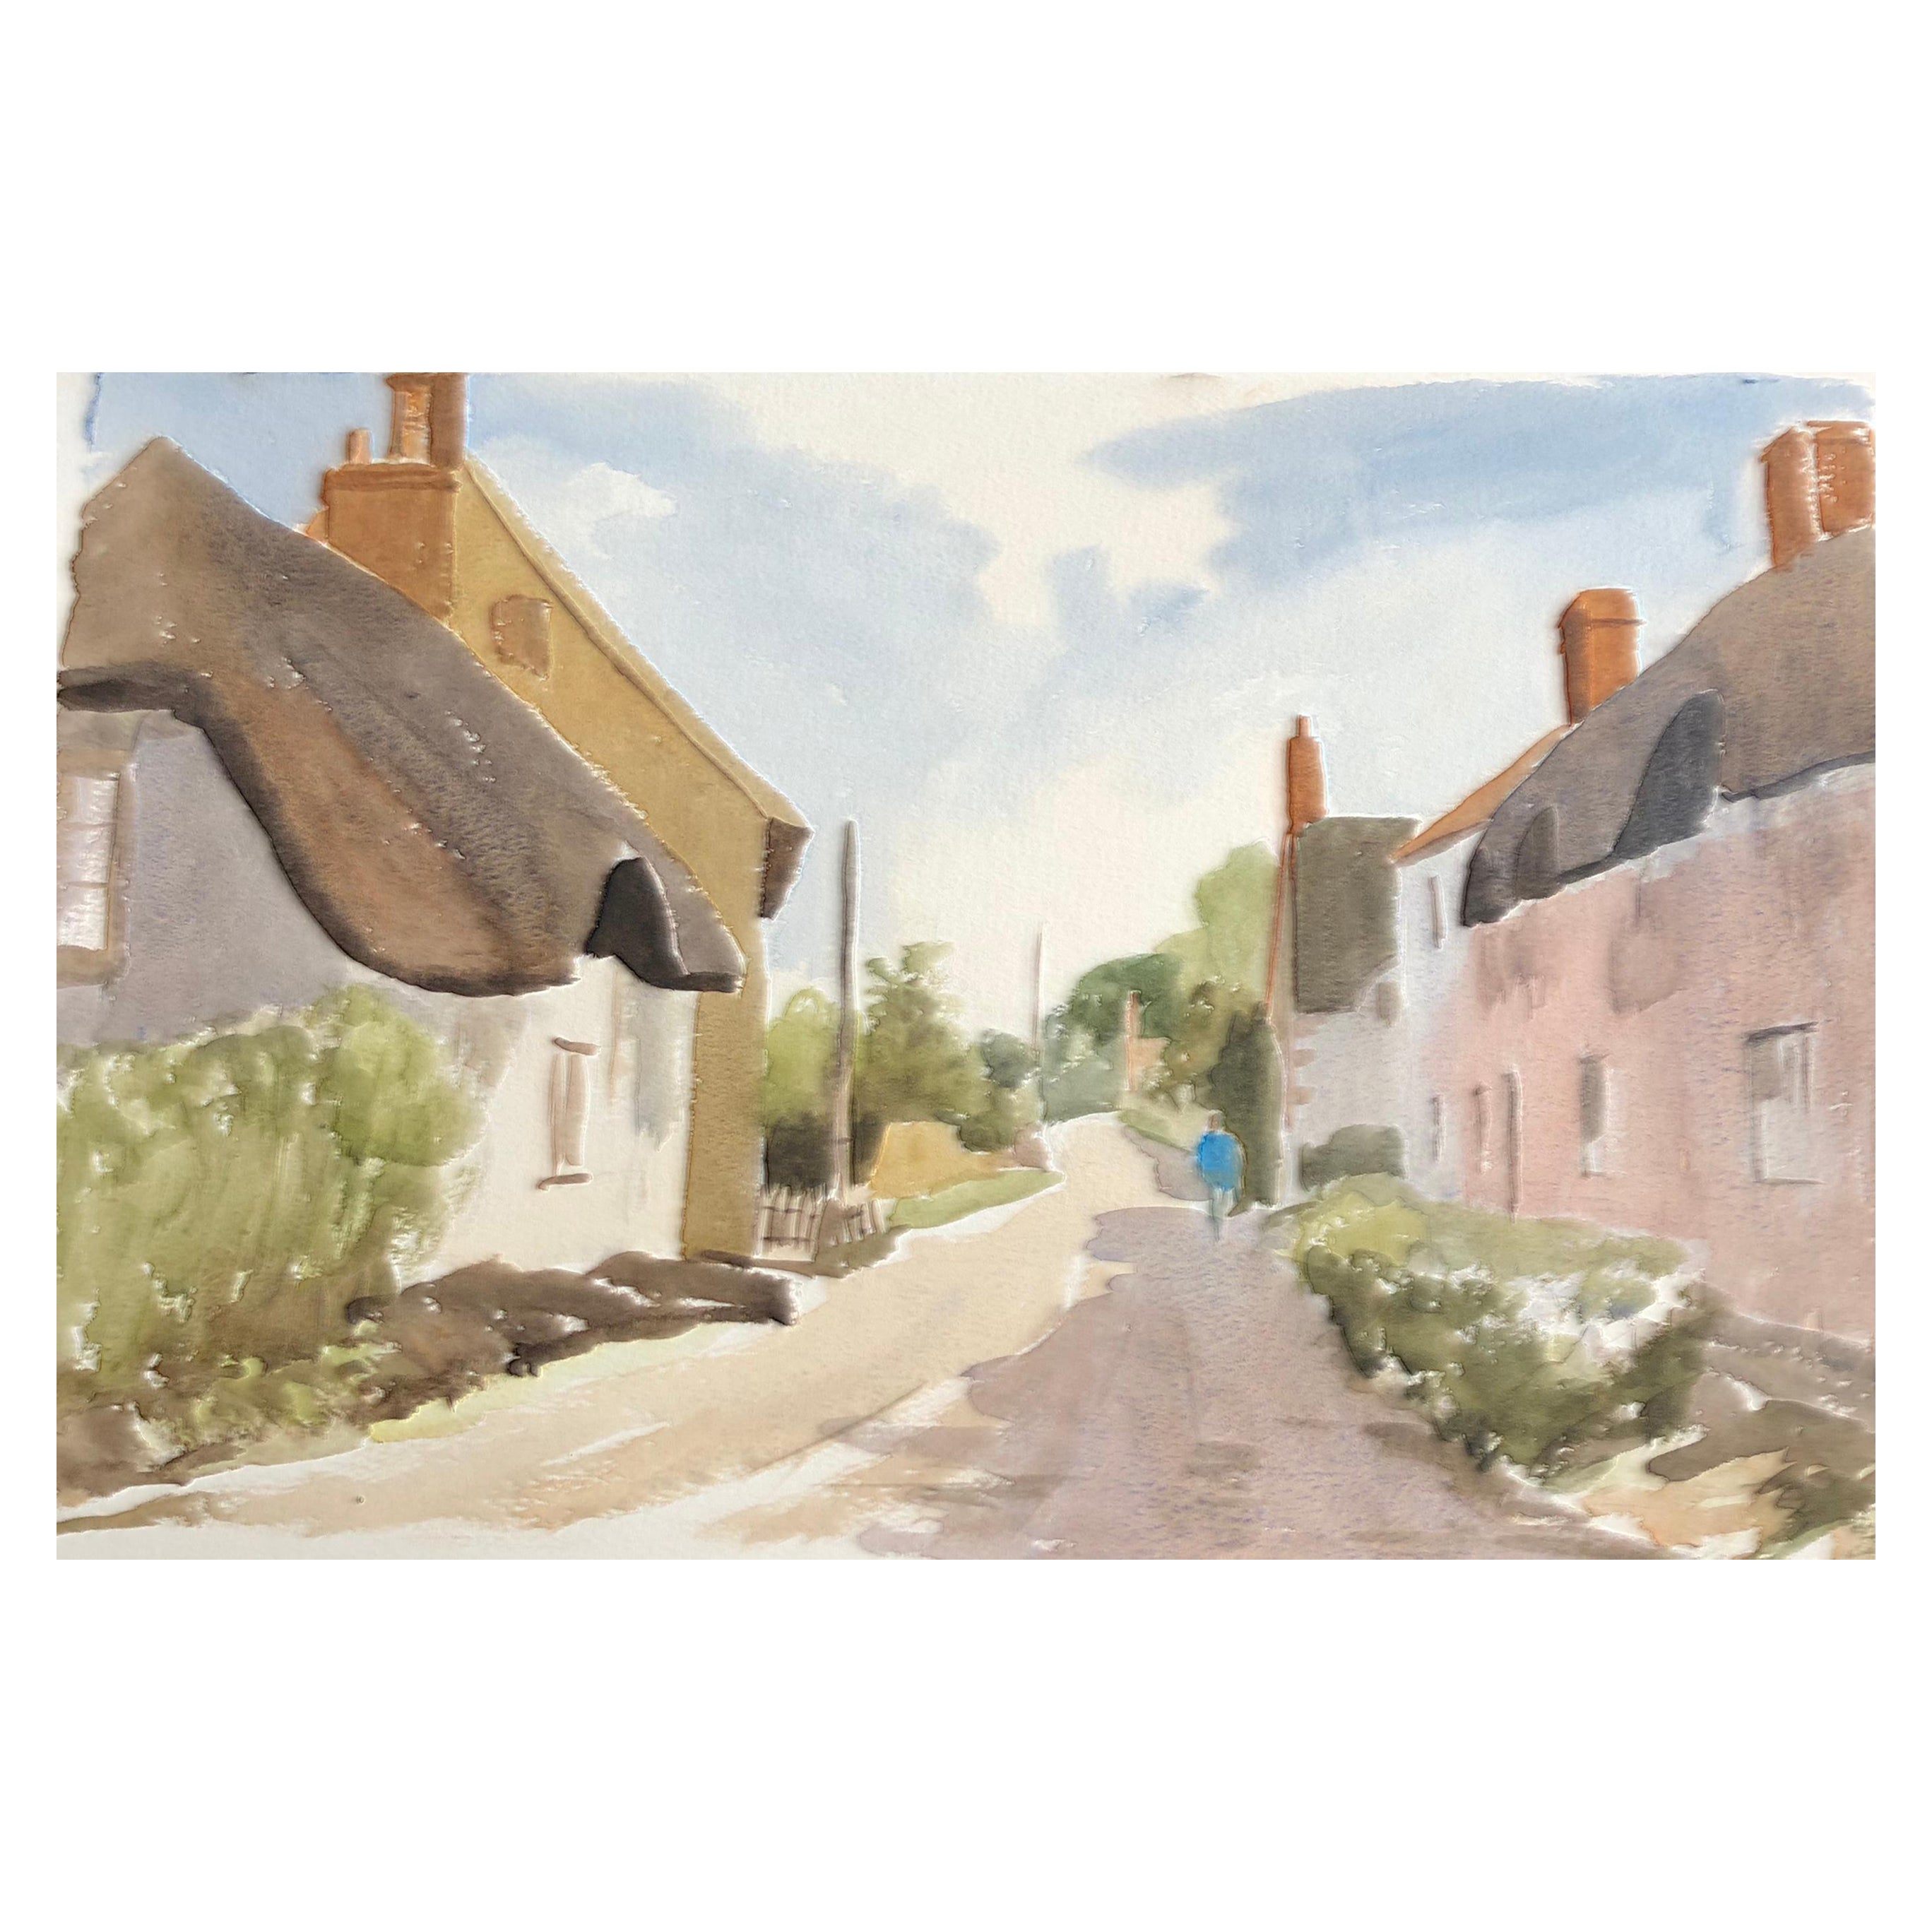 Thatched Cottages Rural Street, Original British Watercolour Painting